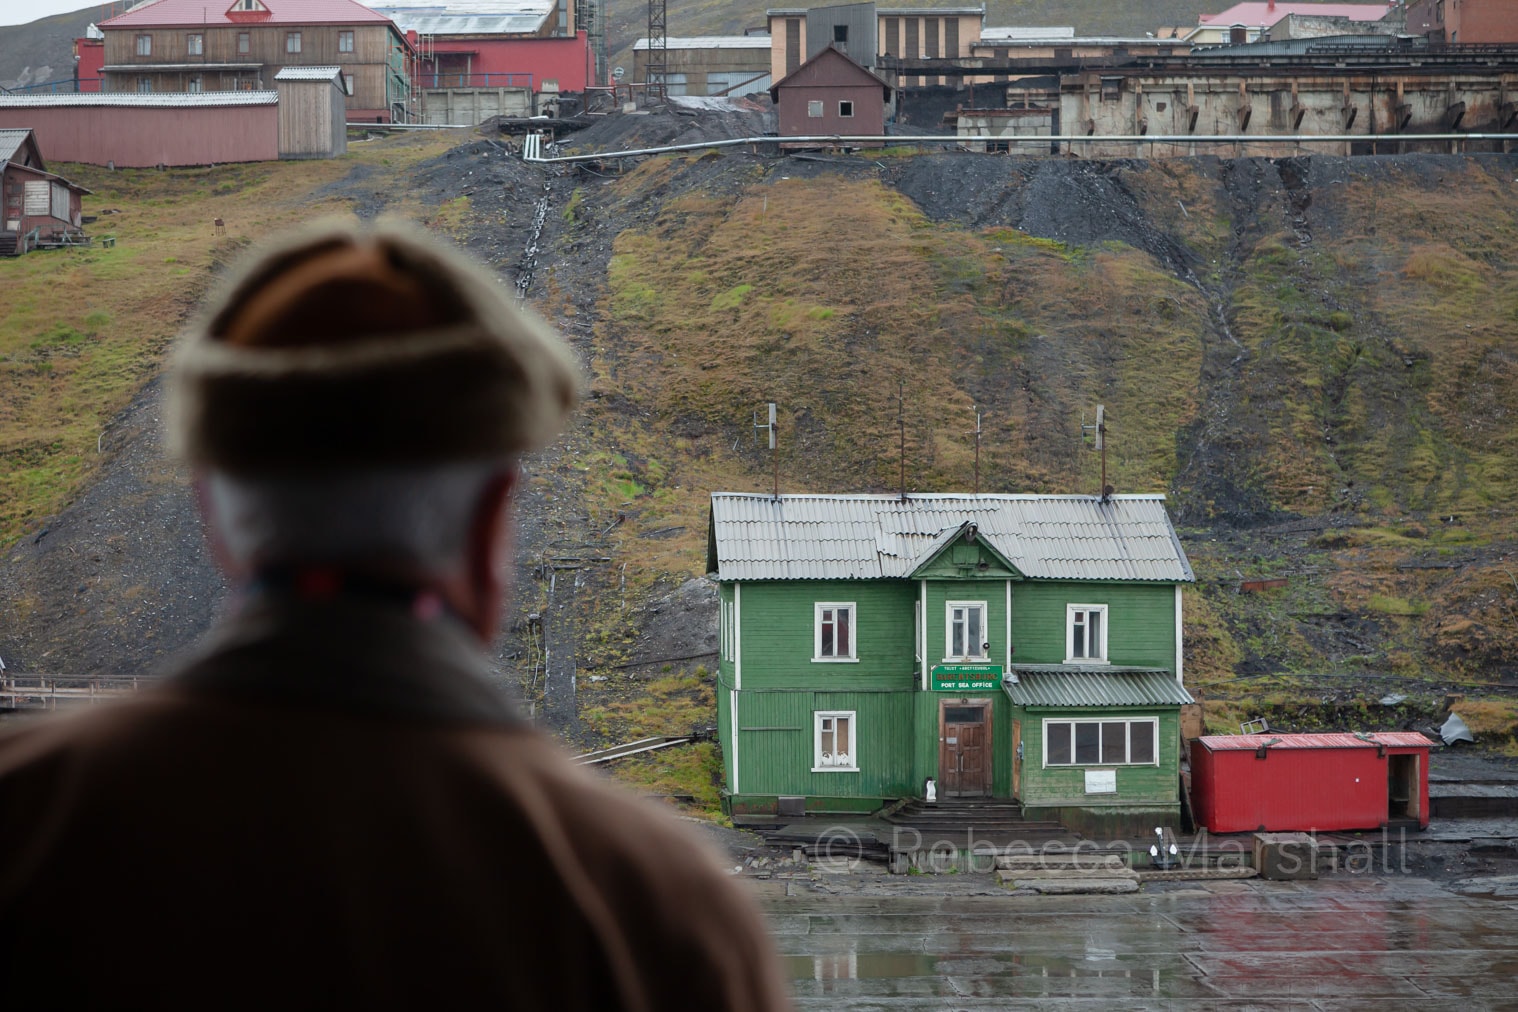 A man (viewed from the back) looks out at a coal mining town